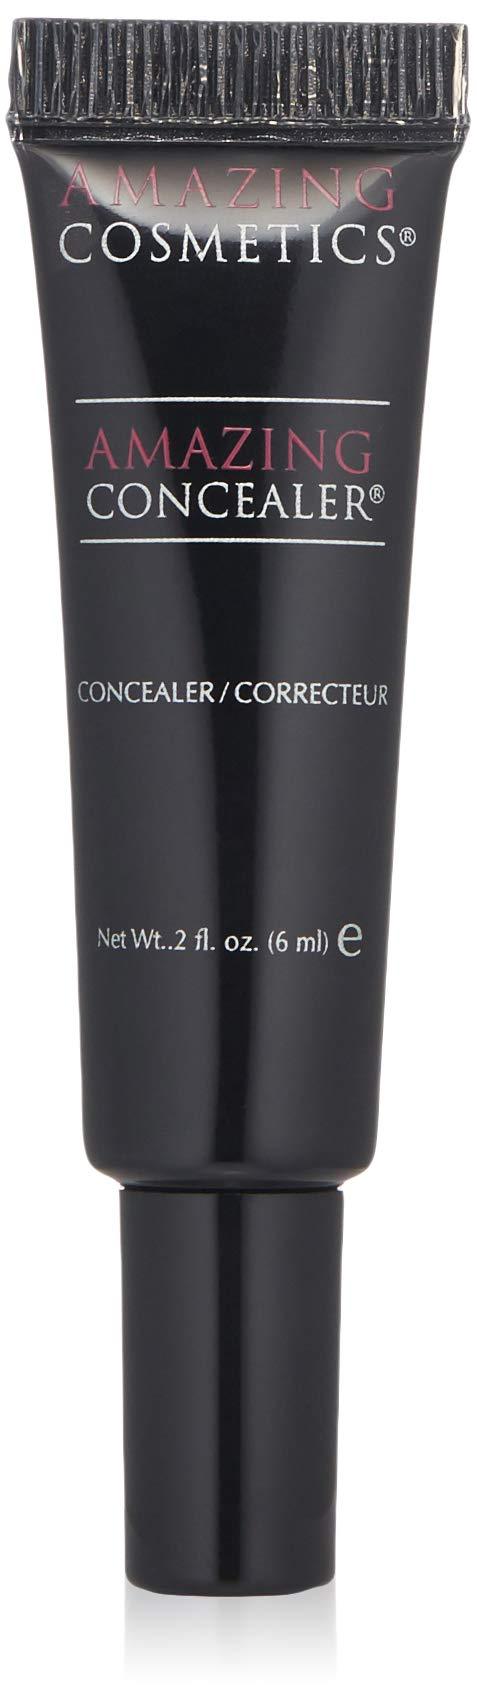 Amazing Cosmetics Amazing Concealer, full coverage long wear concealer makeup for undereye dark circles, acne, blemishes and spots, color correcting shades, melts into skin for most natural finish Medium Beige - BeesActive Australia